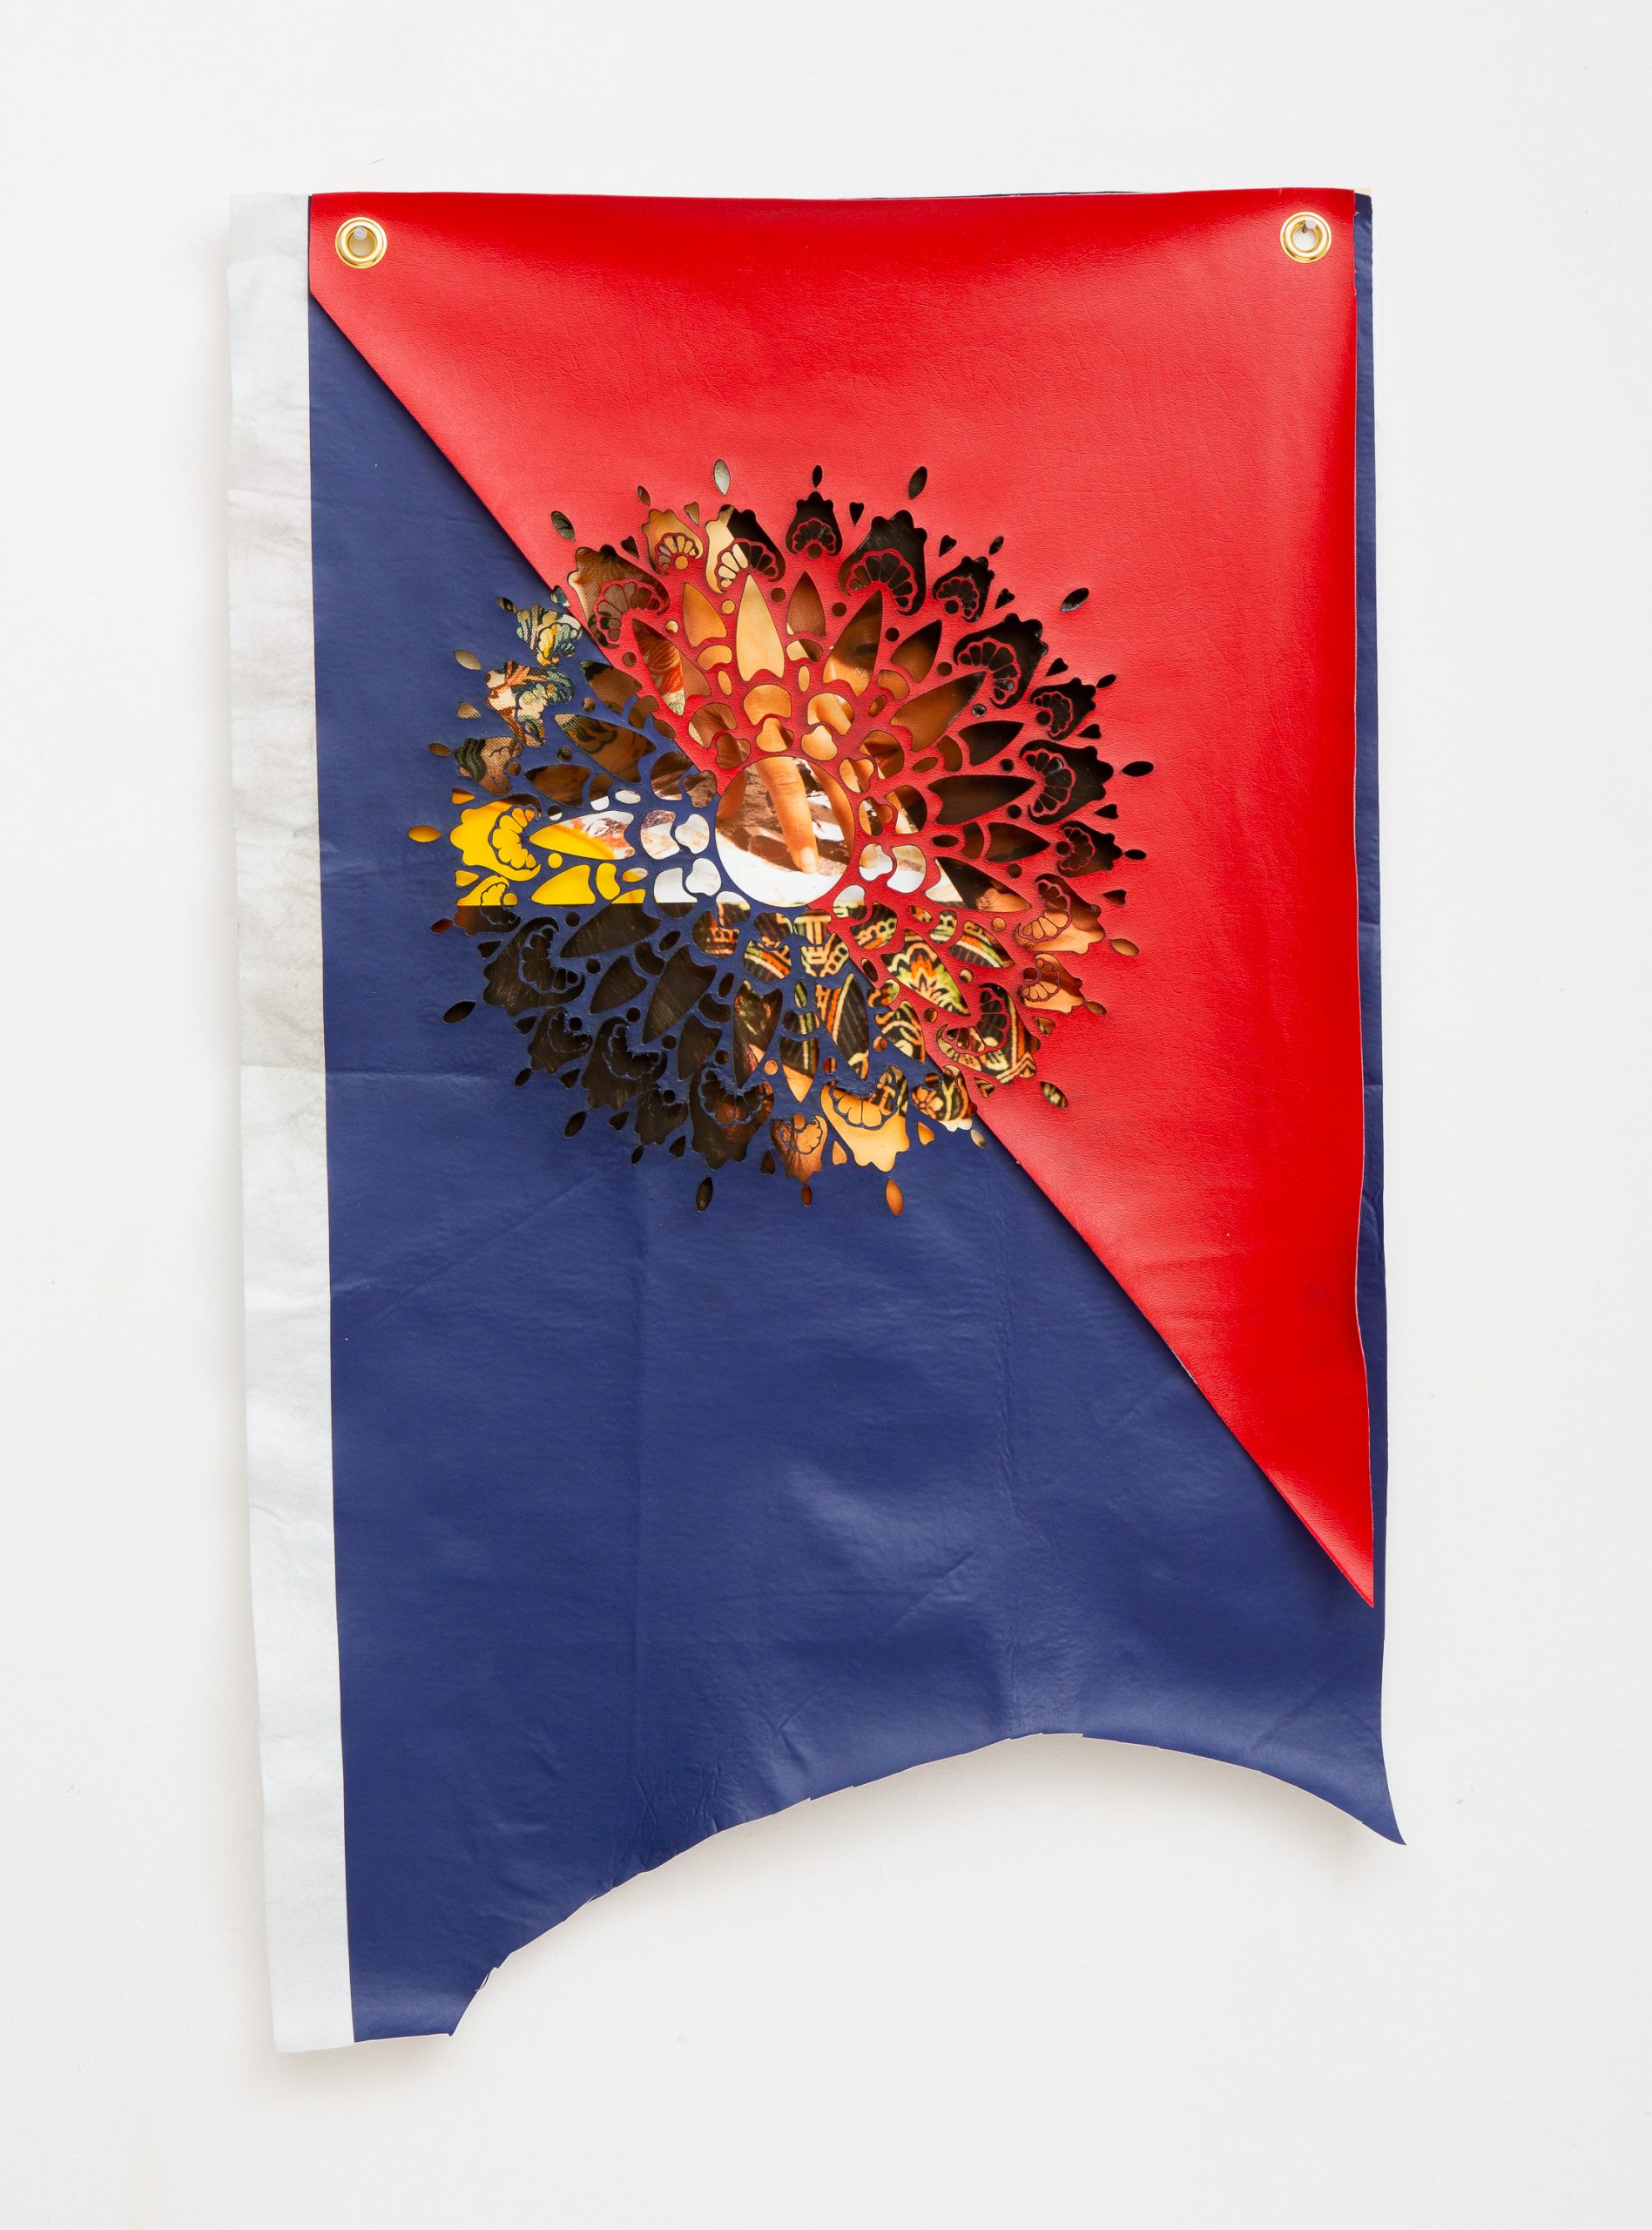 A vertically oriented mixed-media banner/flag hangs from two gold grommets. The top section has a diagonal triangle of red pleather and the bottom section has a diagonal triangle of navy blue pleather. A strip of white runs down the left side. A rounded shape has been roughly cut from the bottom of the banner. In the center of the banner is an ornate circular cutout, which can be seen as a seal or portal. Behind the cutout is a photographic collage of fragments of patterned fabric that also reads as tattooed flesh, the artist’s face, and their hand in the act of arranging materials into a composition.